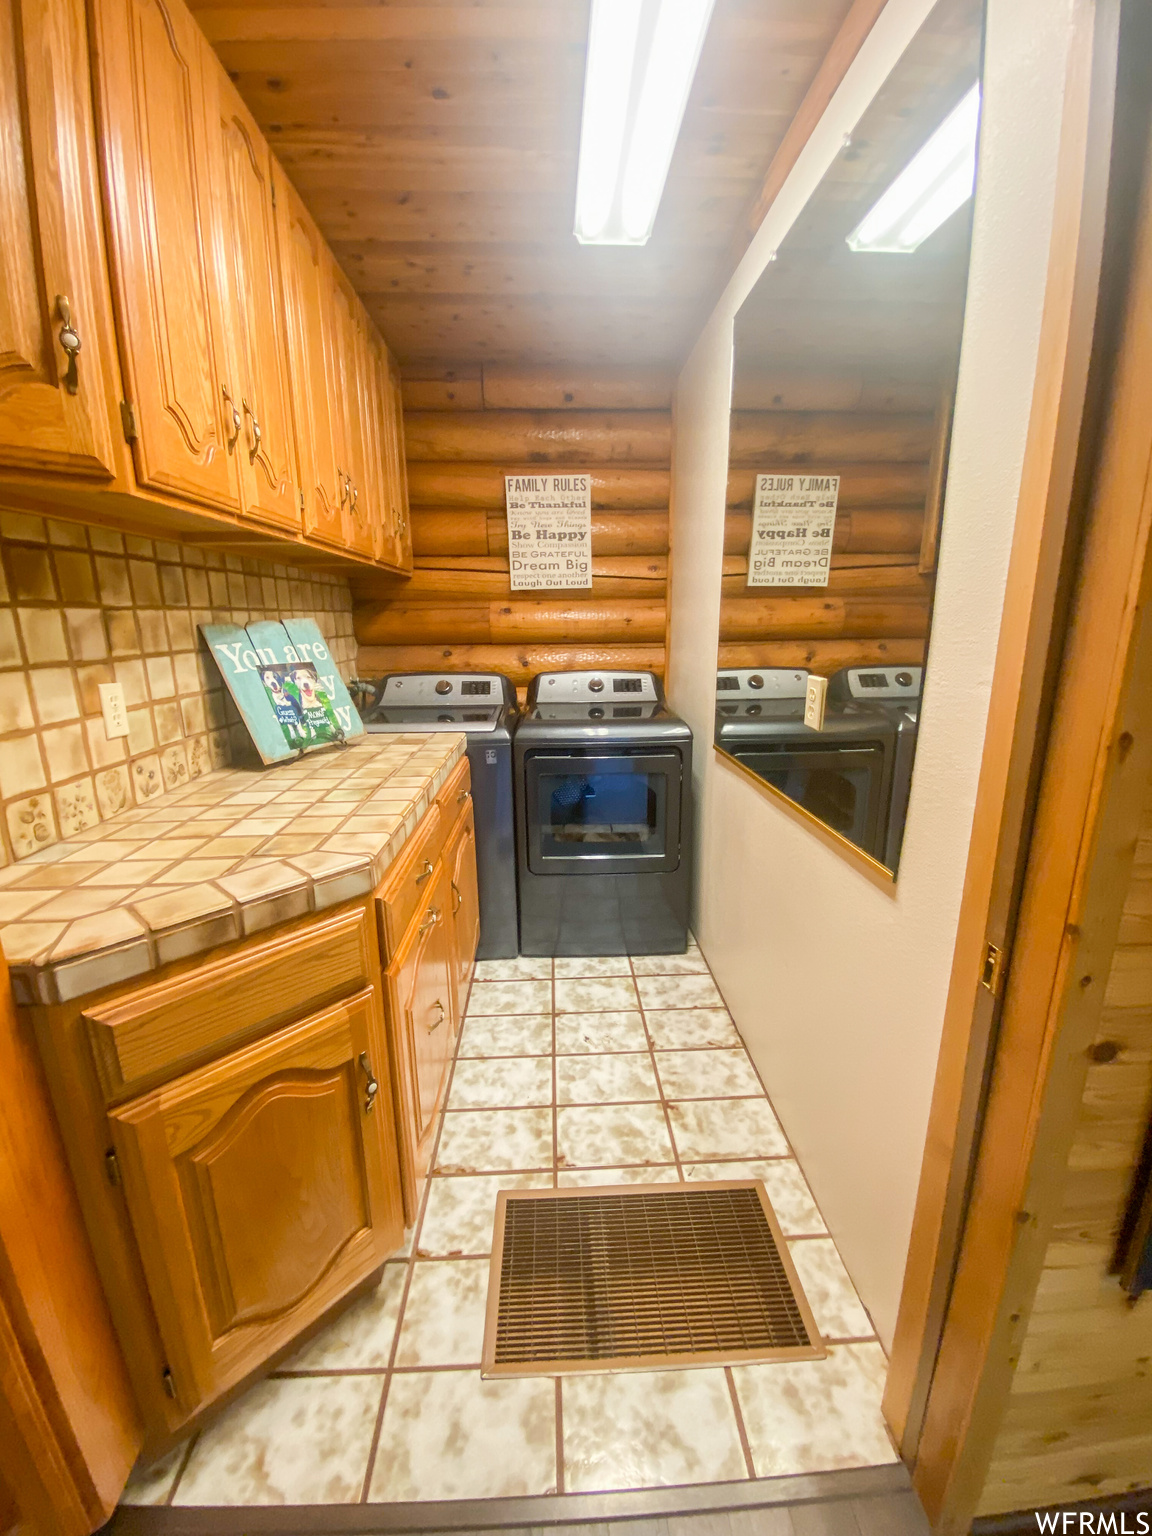 Kitchen with log walls, light tile floors, tile counters, washer and clothes dryer, and backsplash